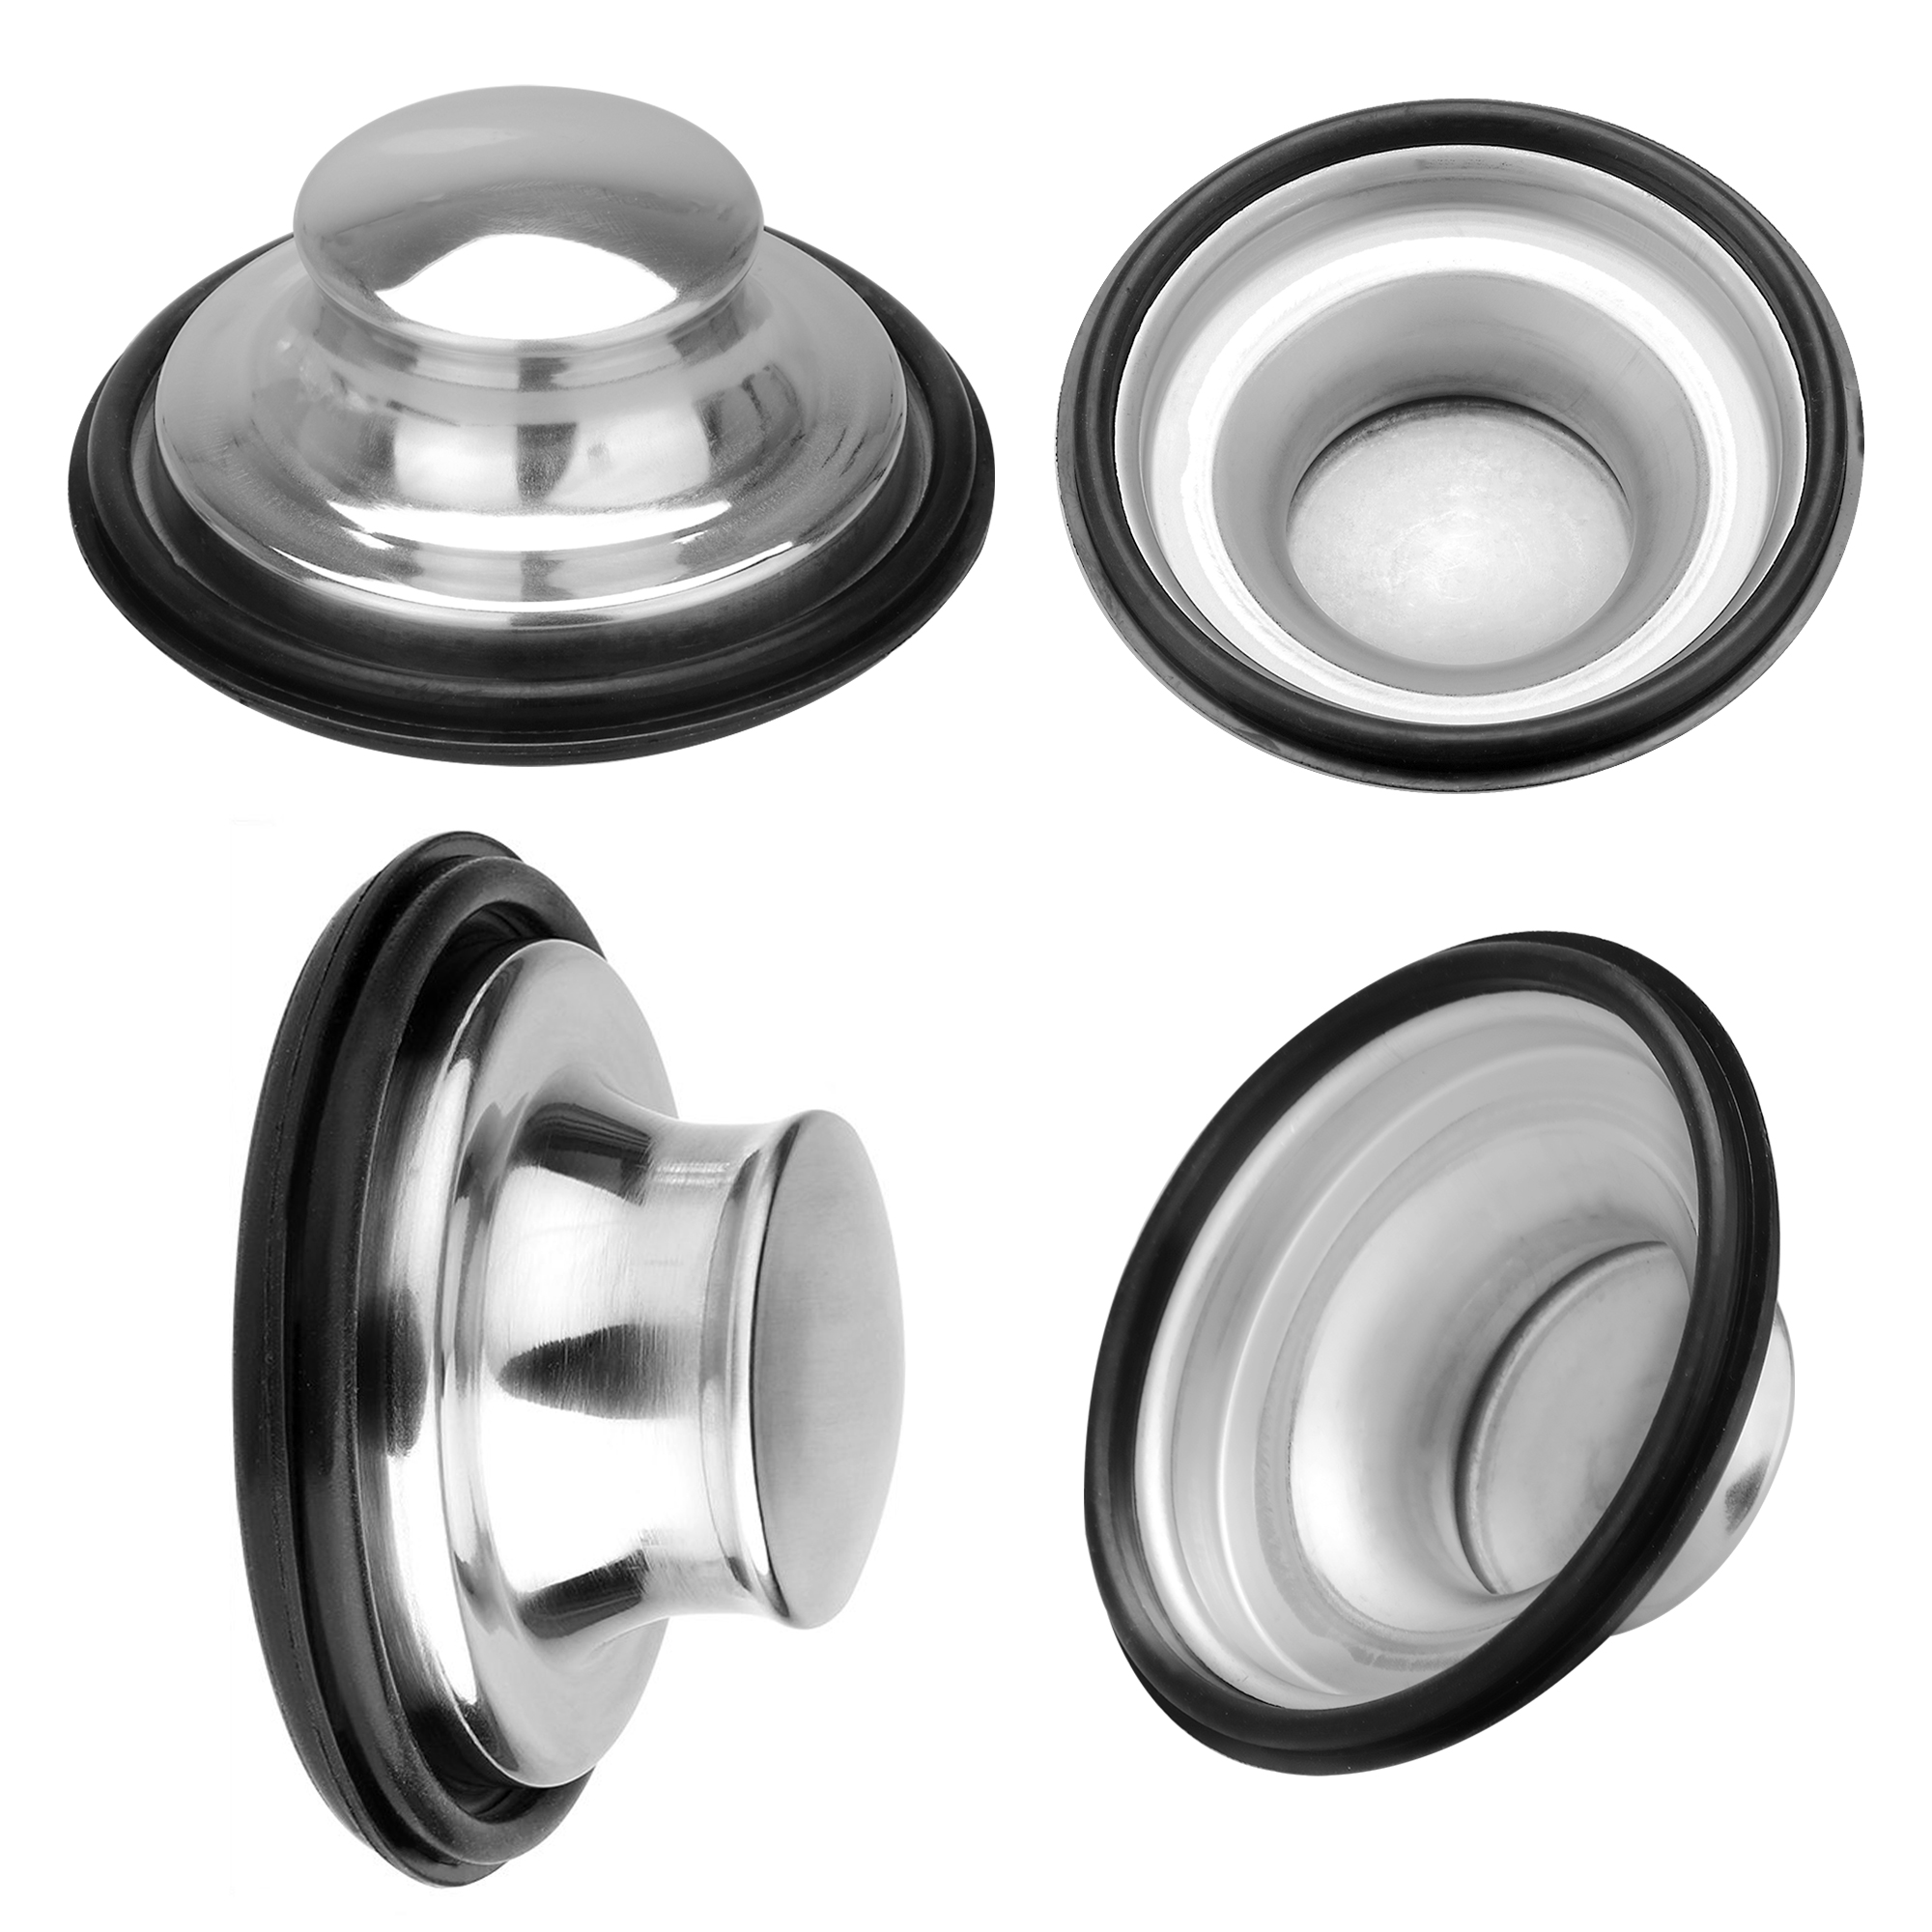 TSV Universal Kitchen Sink Stopper Cover, Stainless Steel Sink Drain Plug Cover Replacement - image 3 of 7